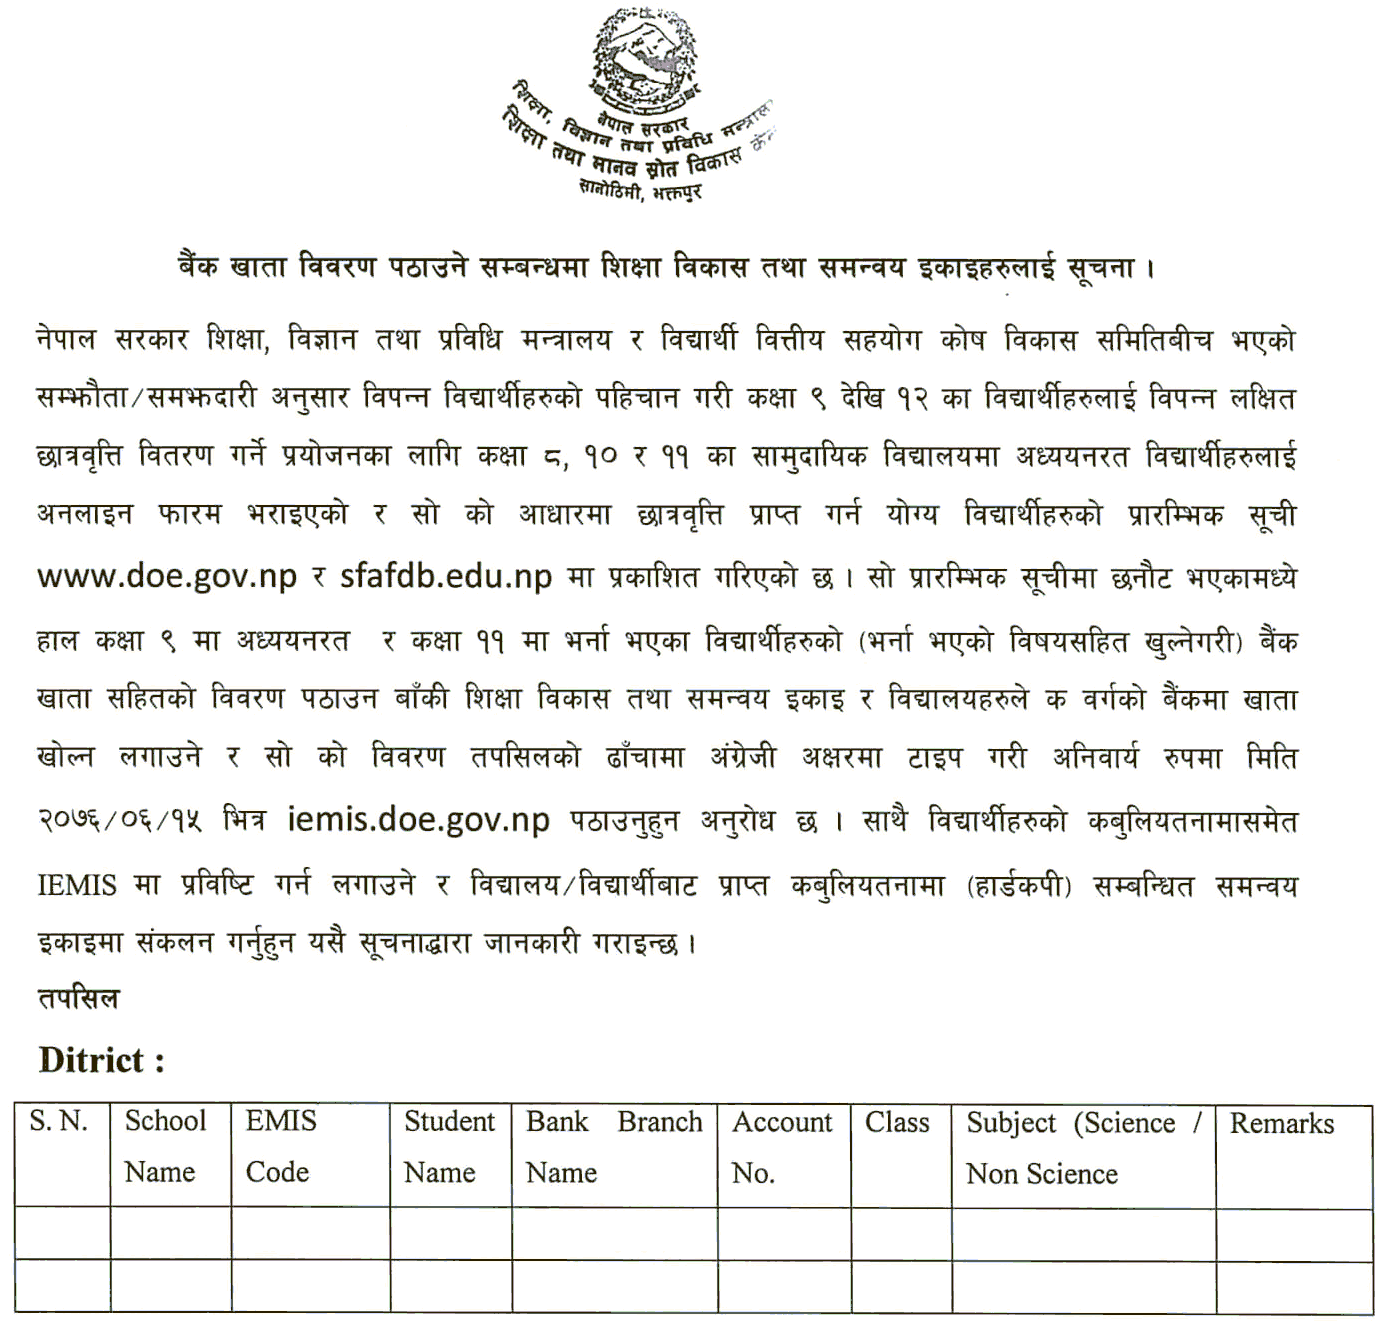 Ministry of Education Notice Regarding Bank Account Details